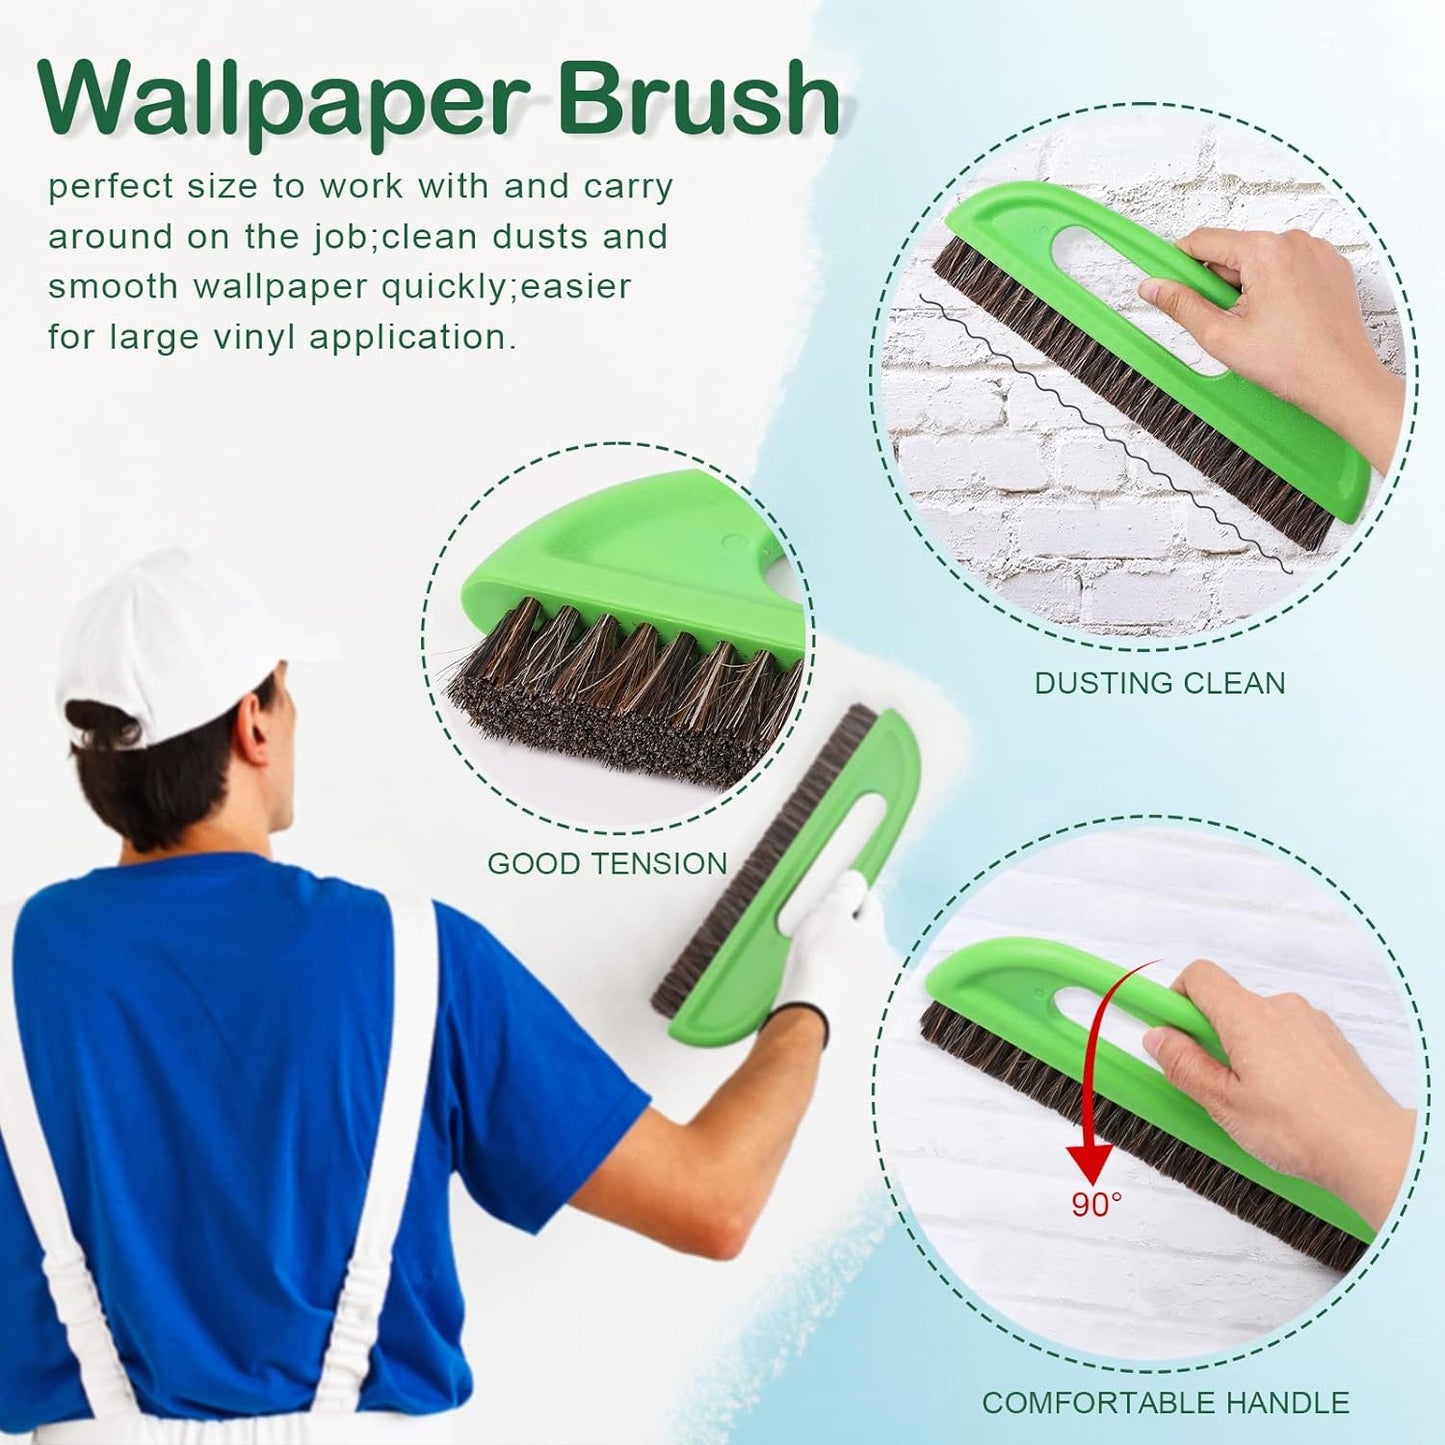 WRAPXPERT Wallpaper Smoothing Tools,Wallpaper Tool Kit with Squeegee Smoother,Seam Roller,Wallpaper Brush for Wallpaper Hanging,Contact Paper,Vinyl Application,Wallpaper Paste